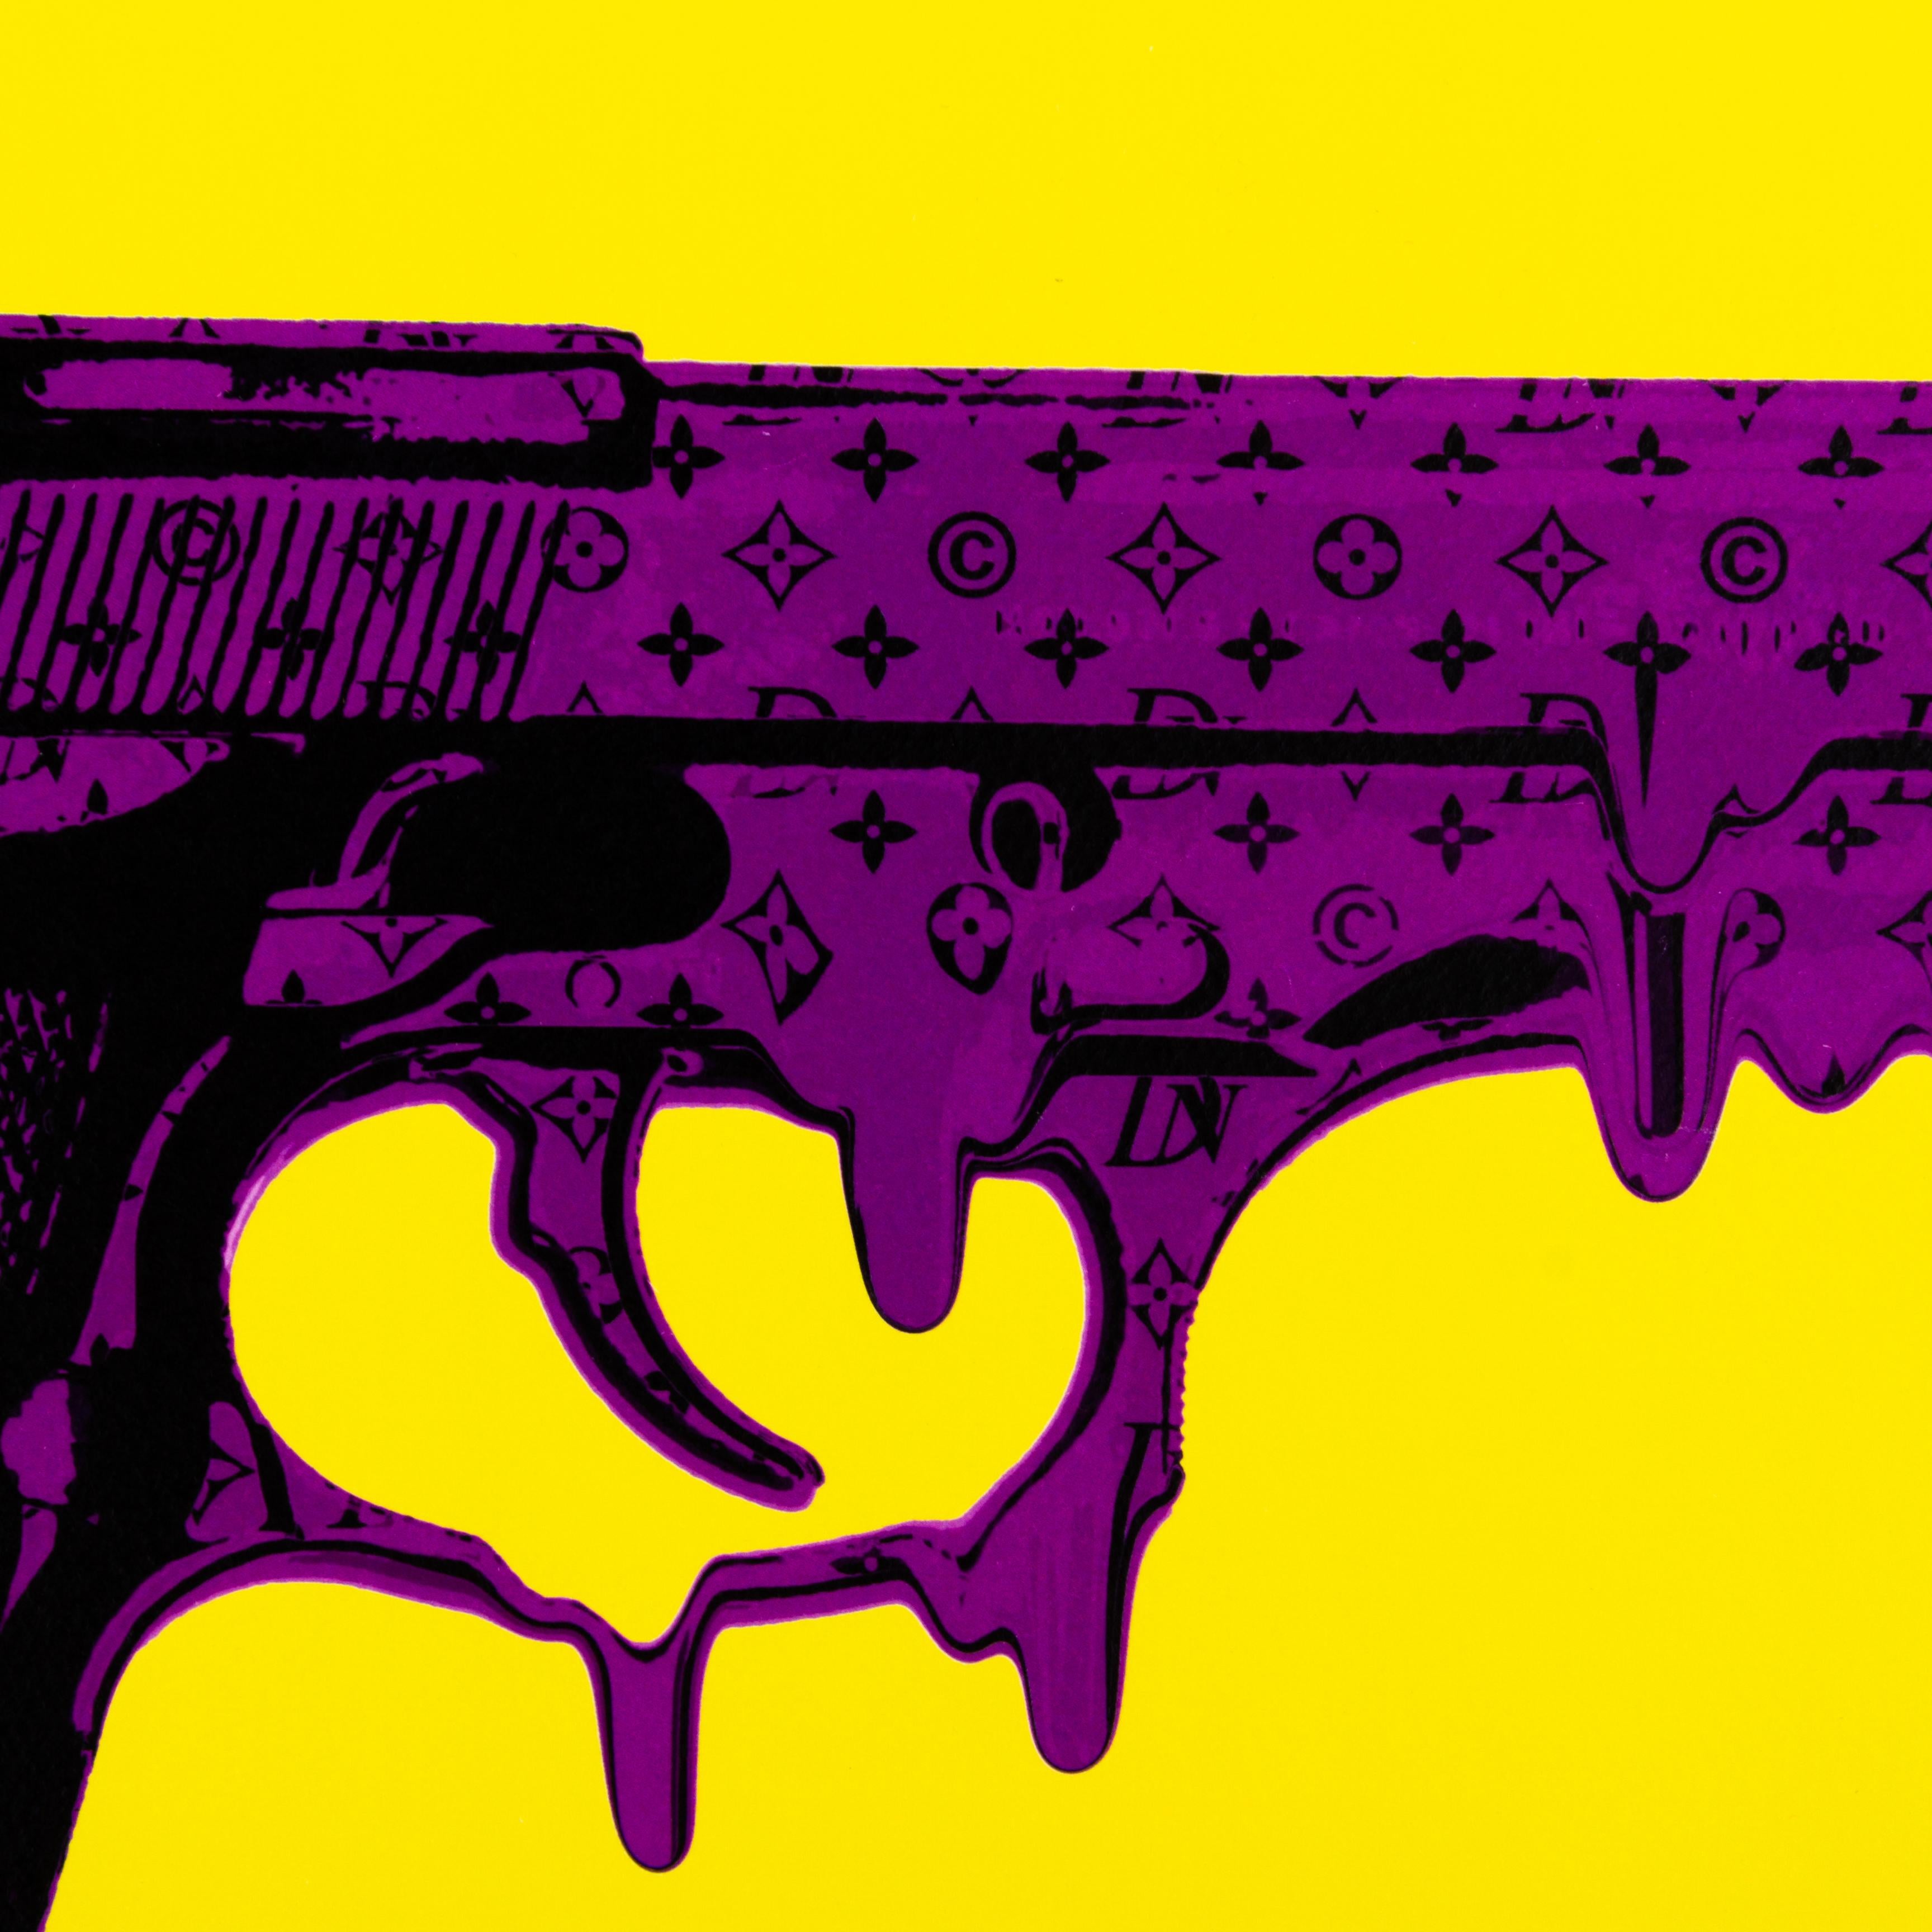 From a private collection.
Death NYC Signed Limited Ed Pop Art Print Louis Vuitton Gun